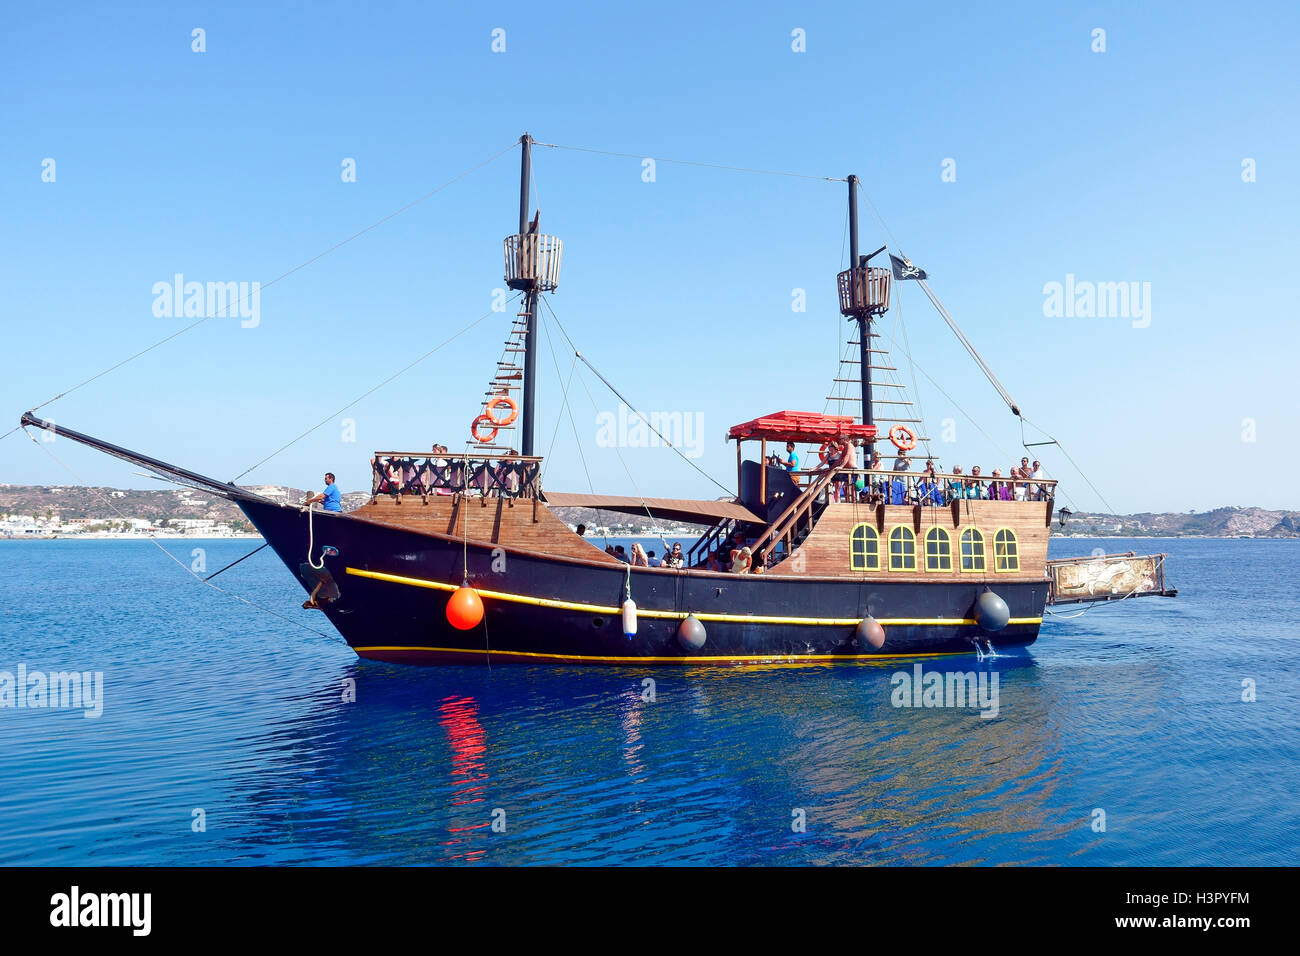 Pirate day trip ship arriving at the harbour at Kefalos Kos, Greece Stock Photo